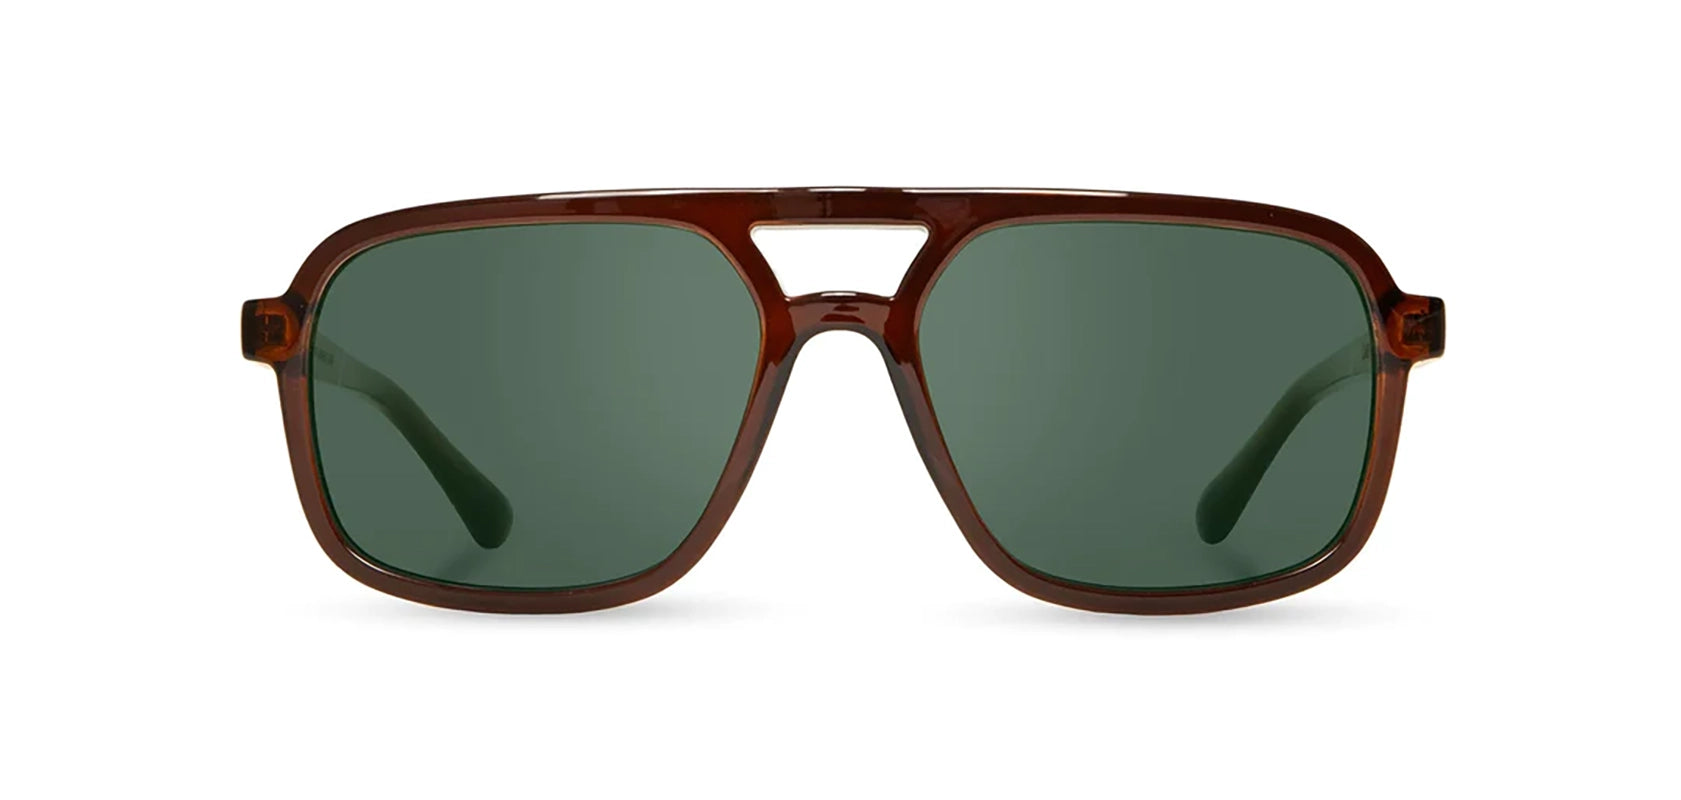 Camp Glacier Sunglasses in Clay & walnut frames, with Grey G15 polarized lenses, front  view